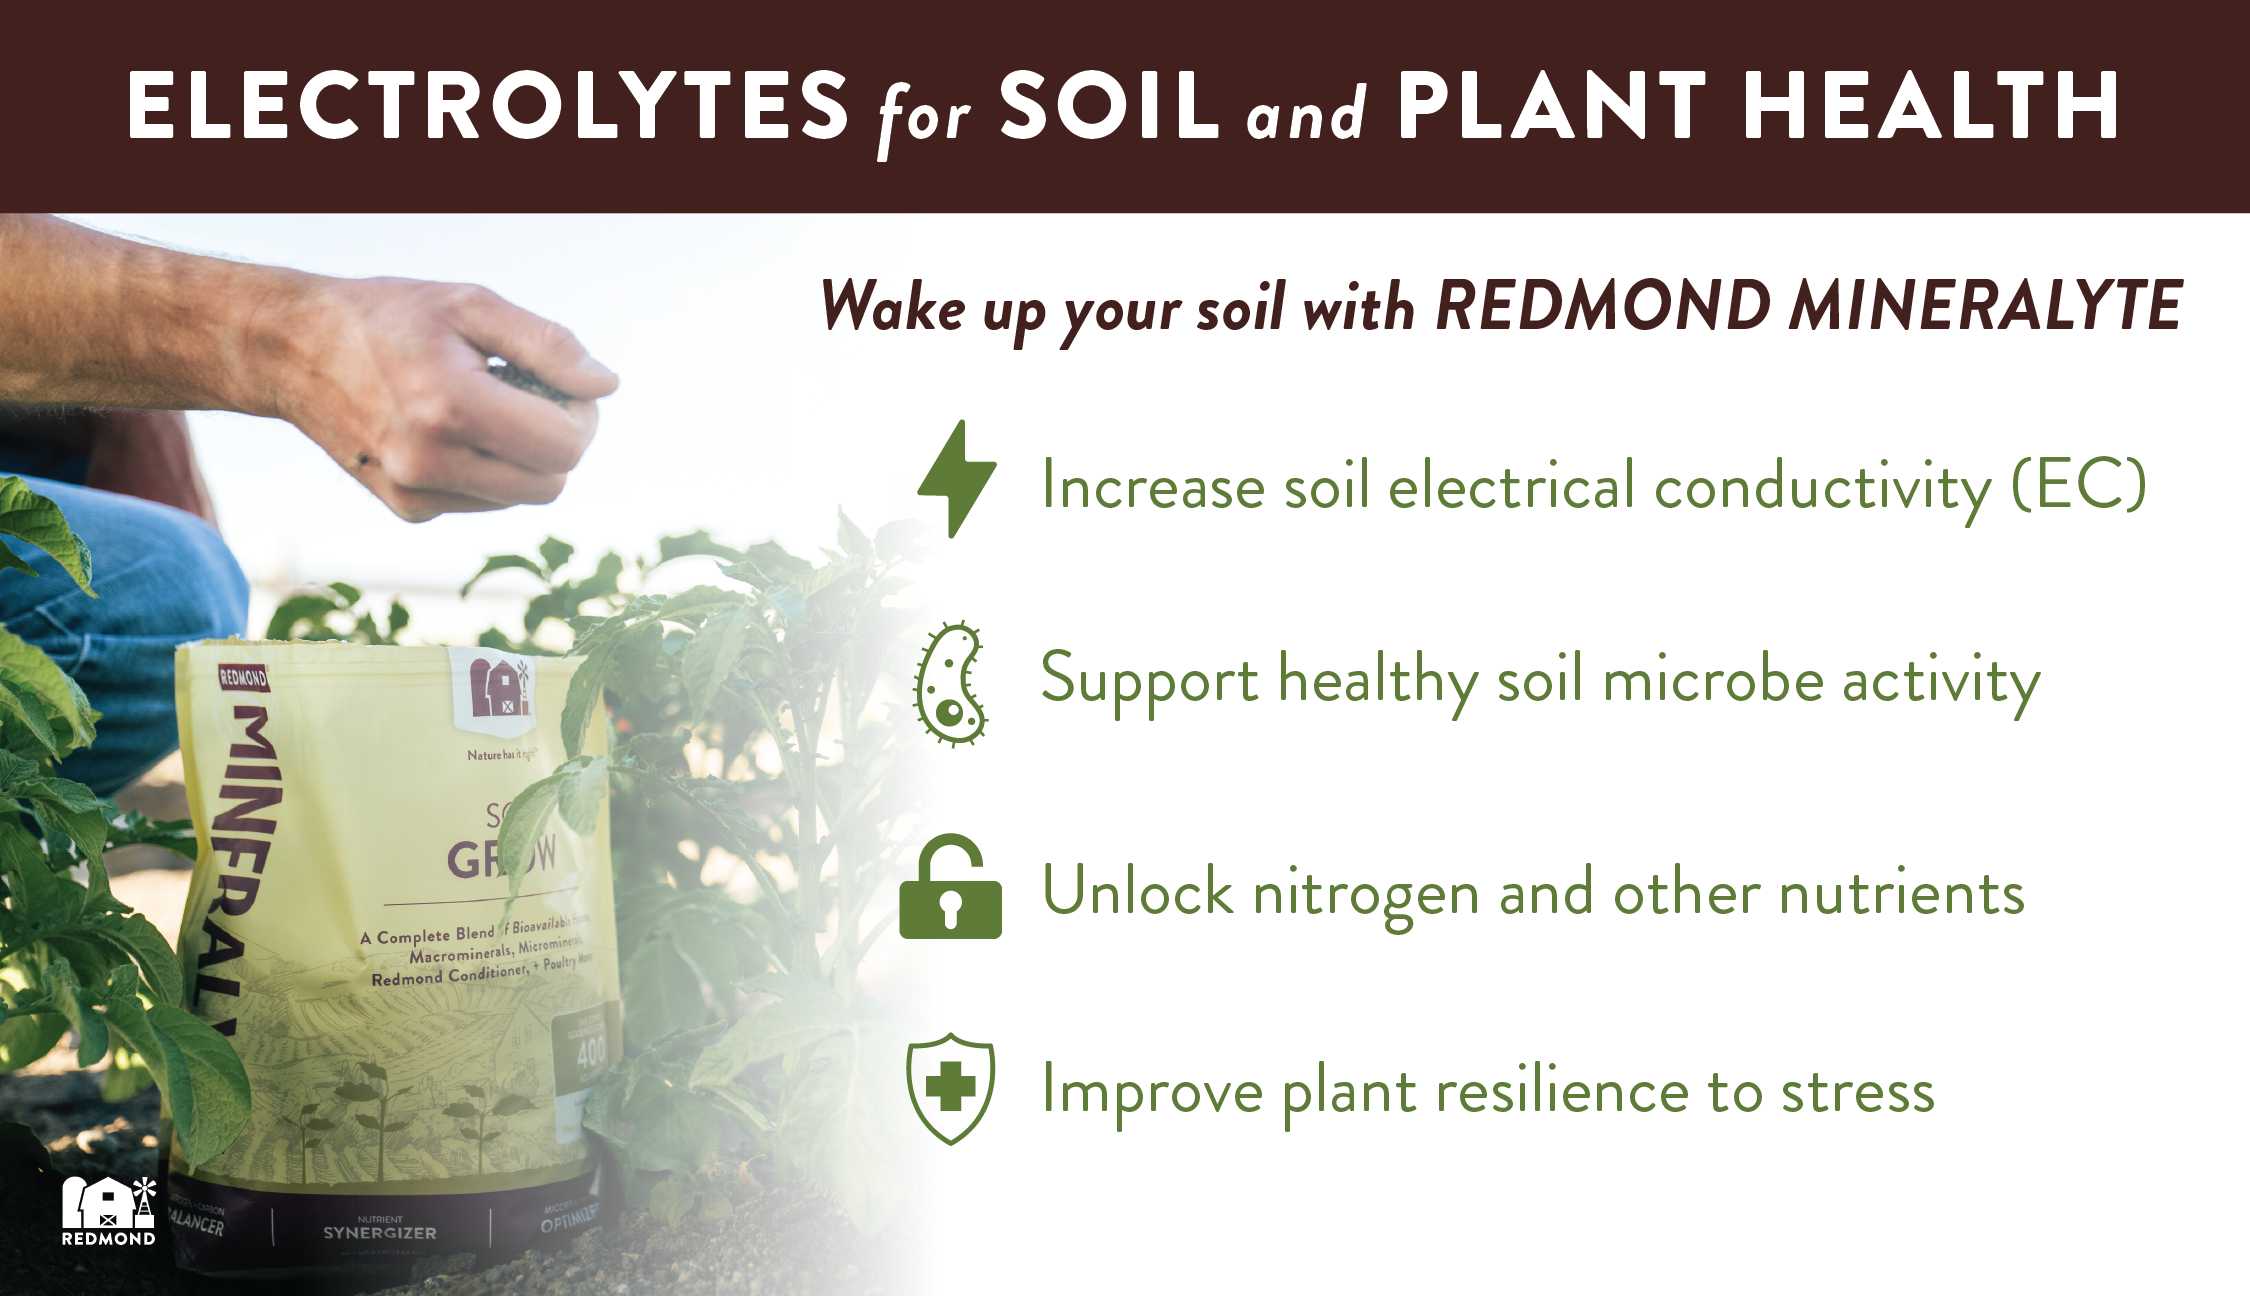 Electrolytes for soil and plant health